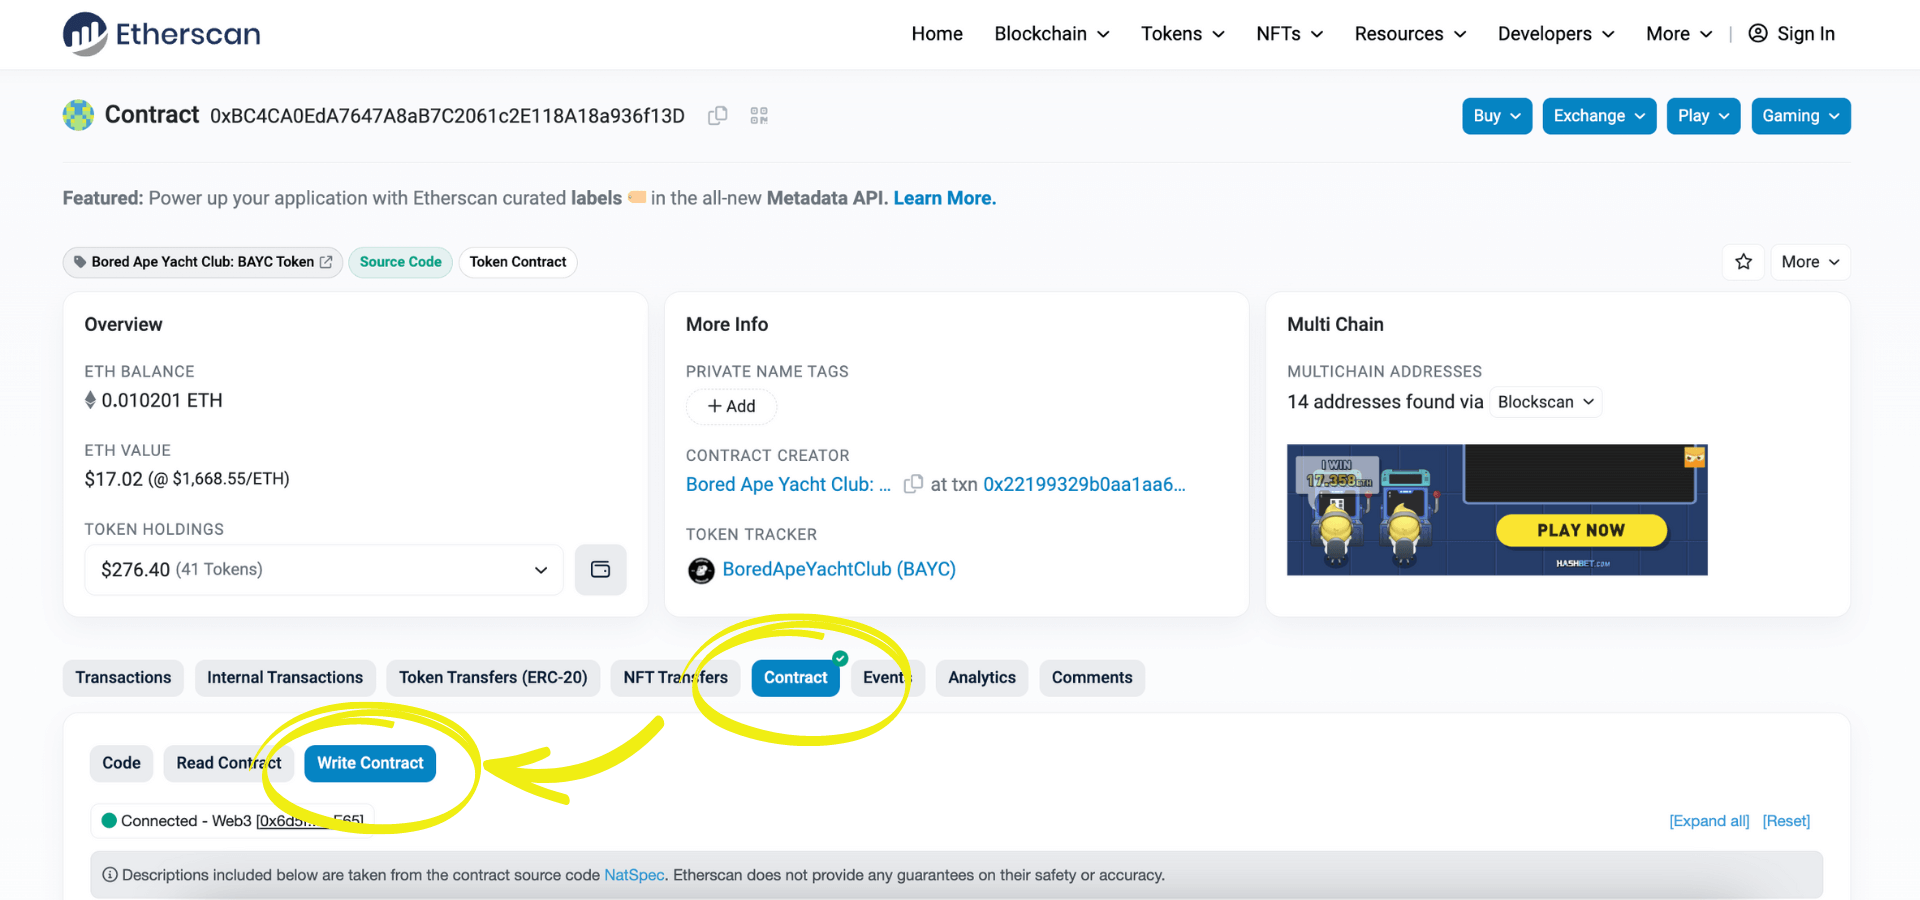 'Write Contract' under the 'Contract' tab on Etherscan